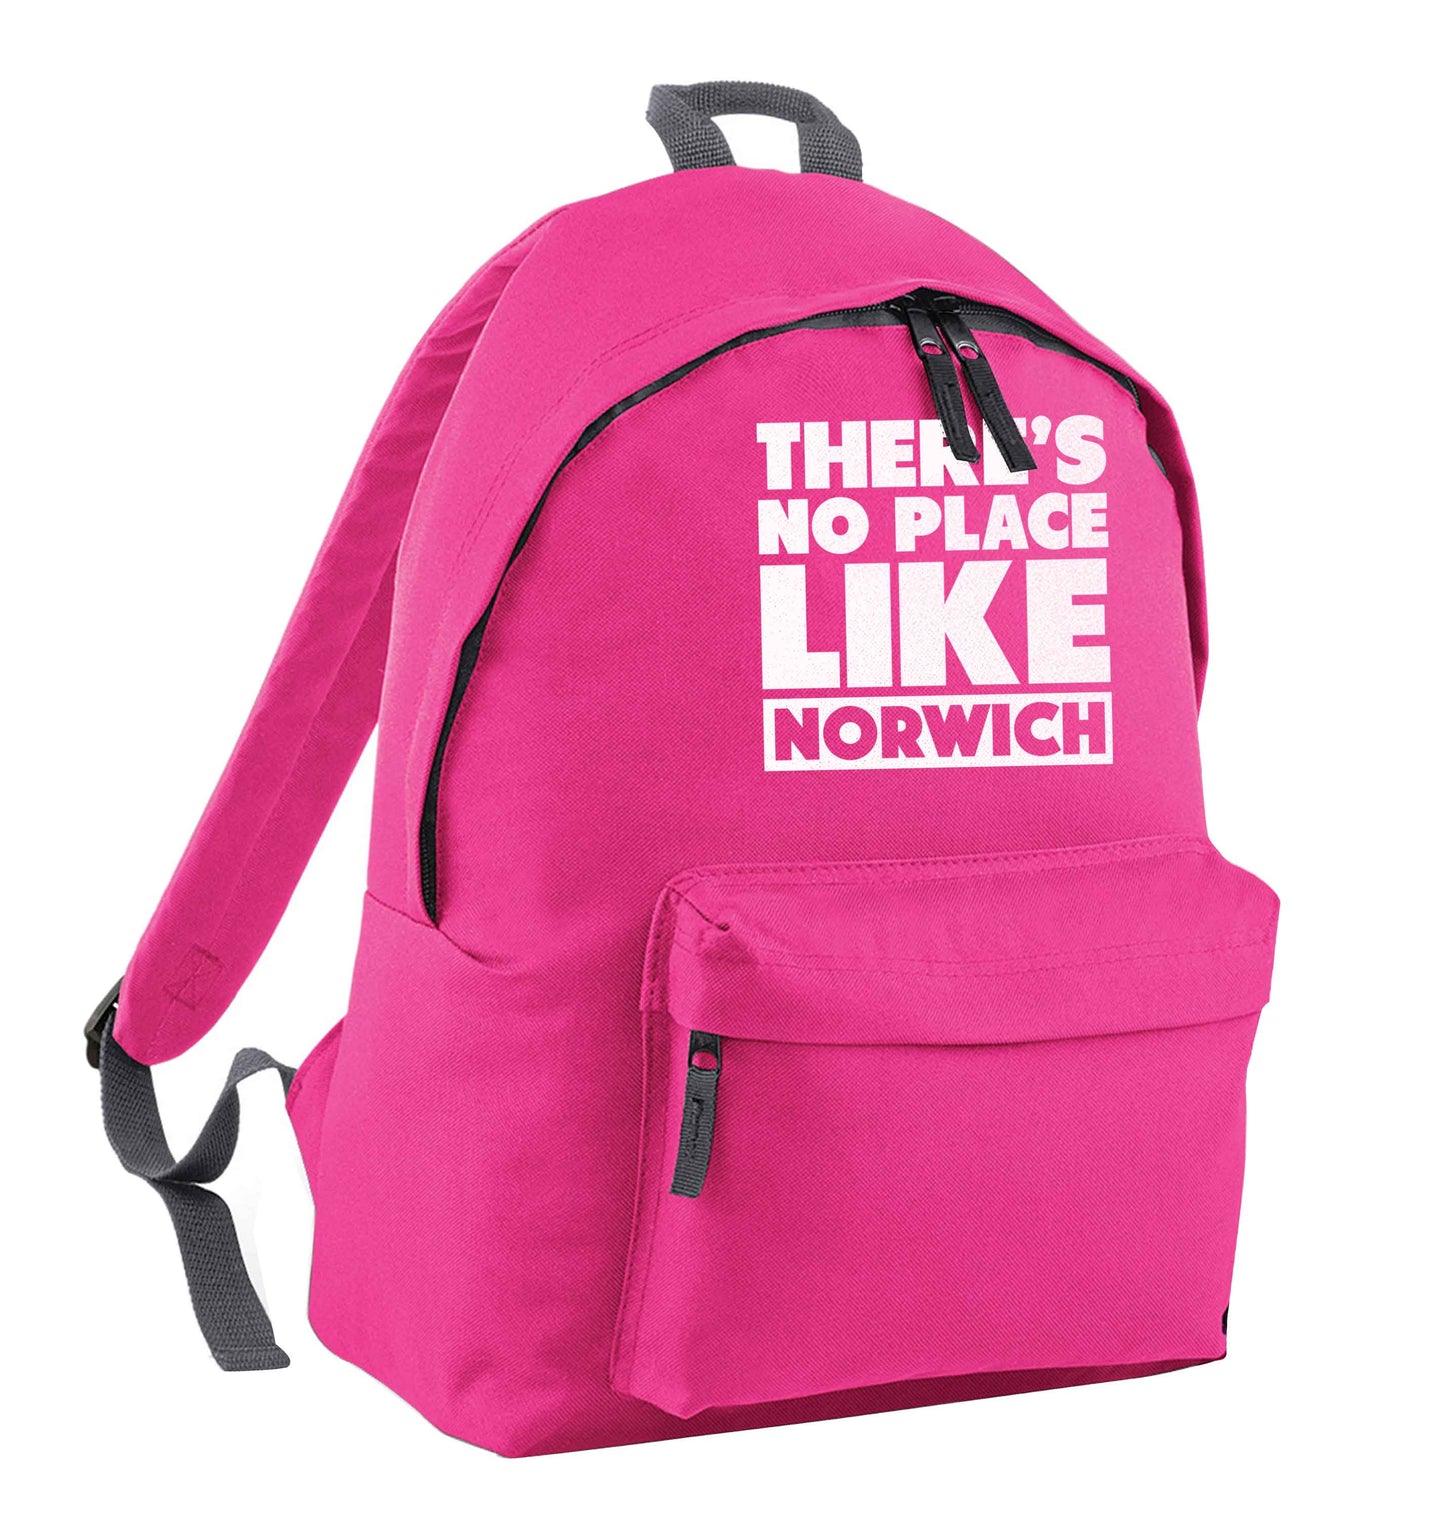 There's no place like Norwich pink adults backpack